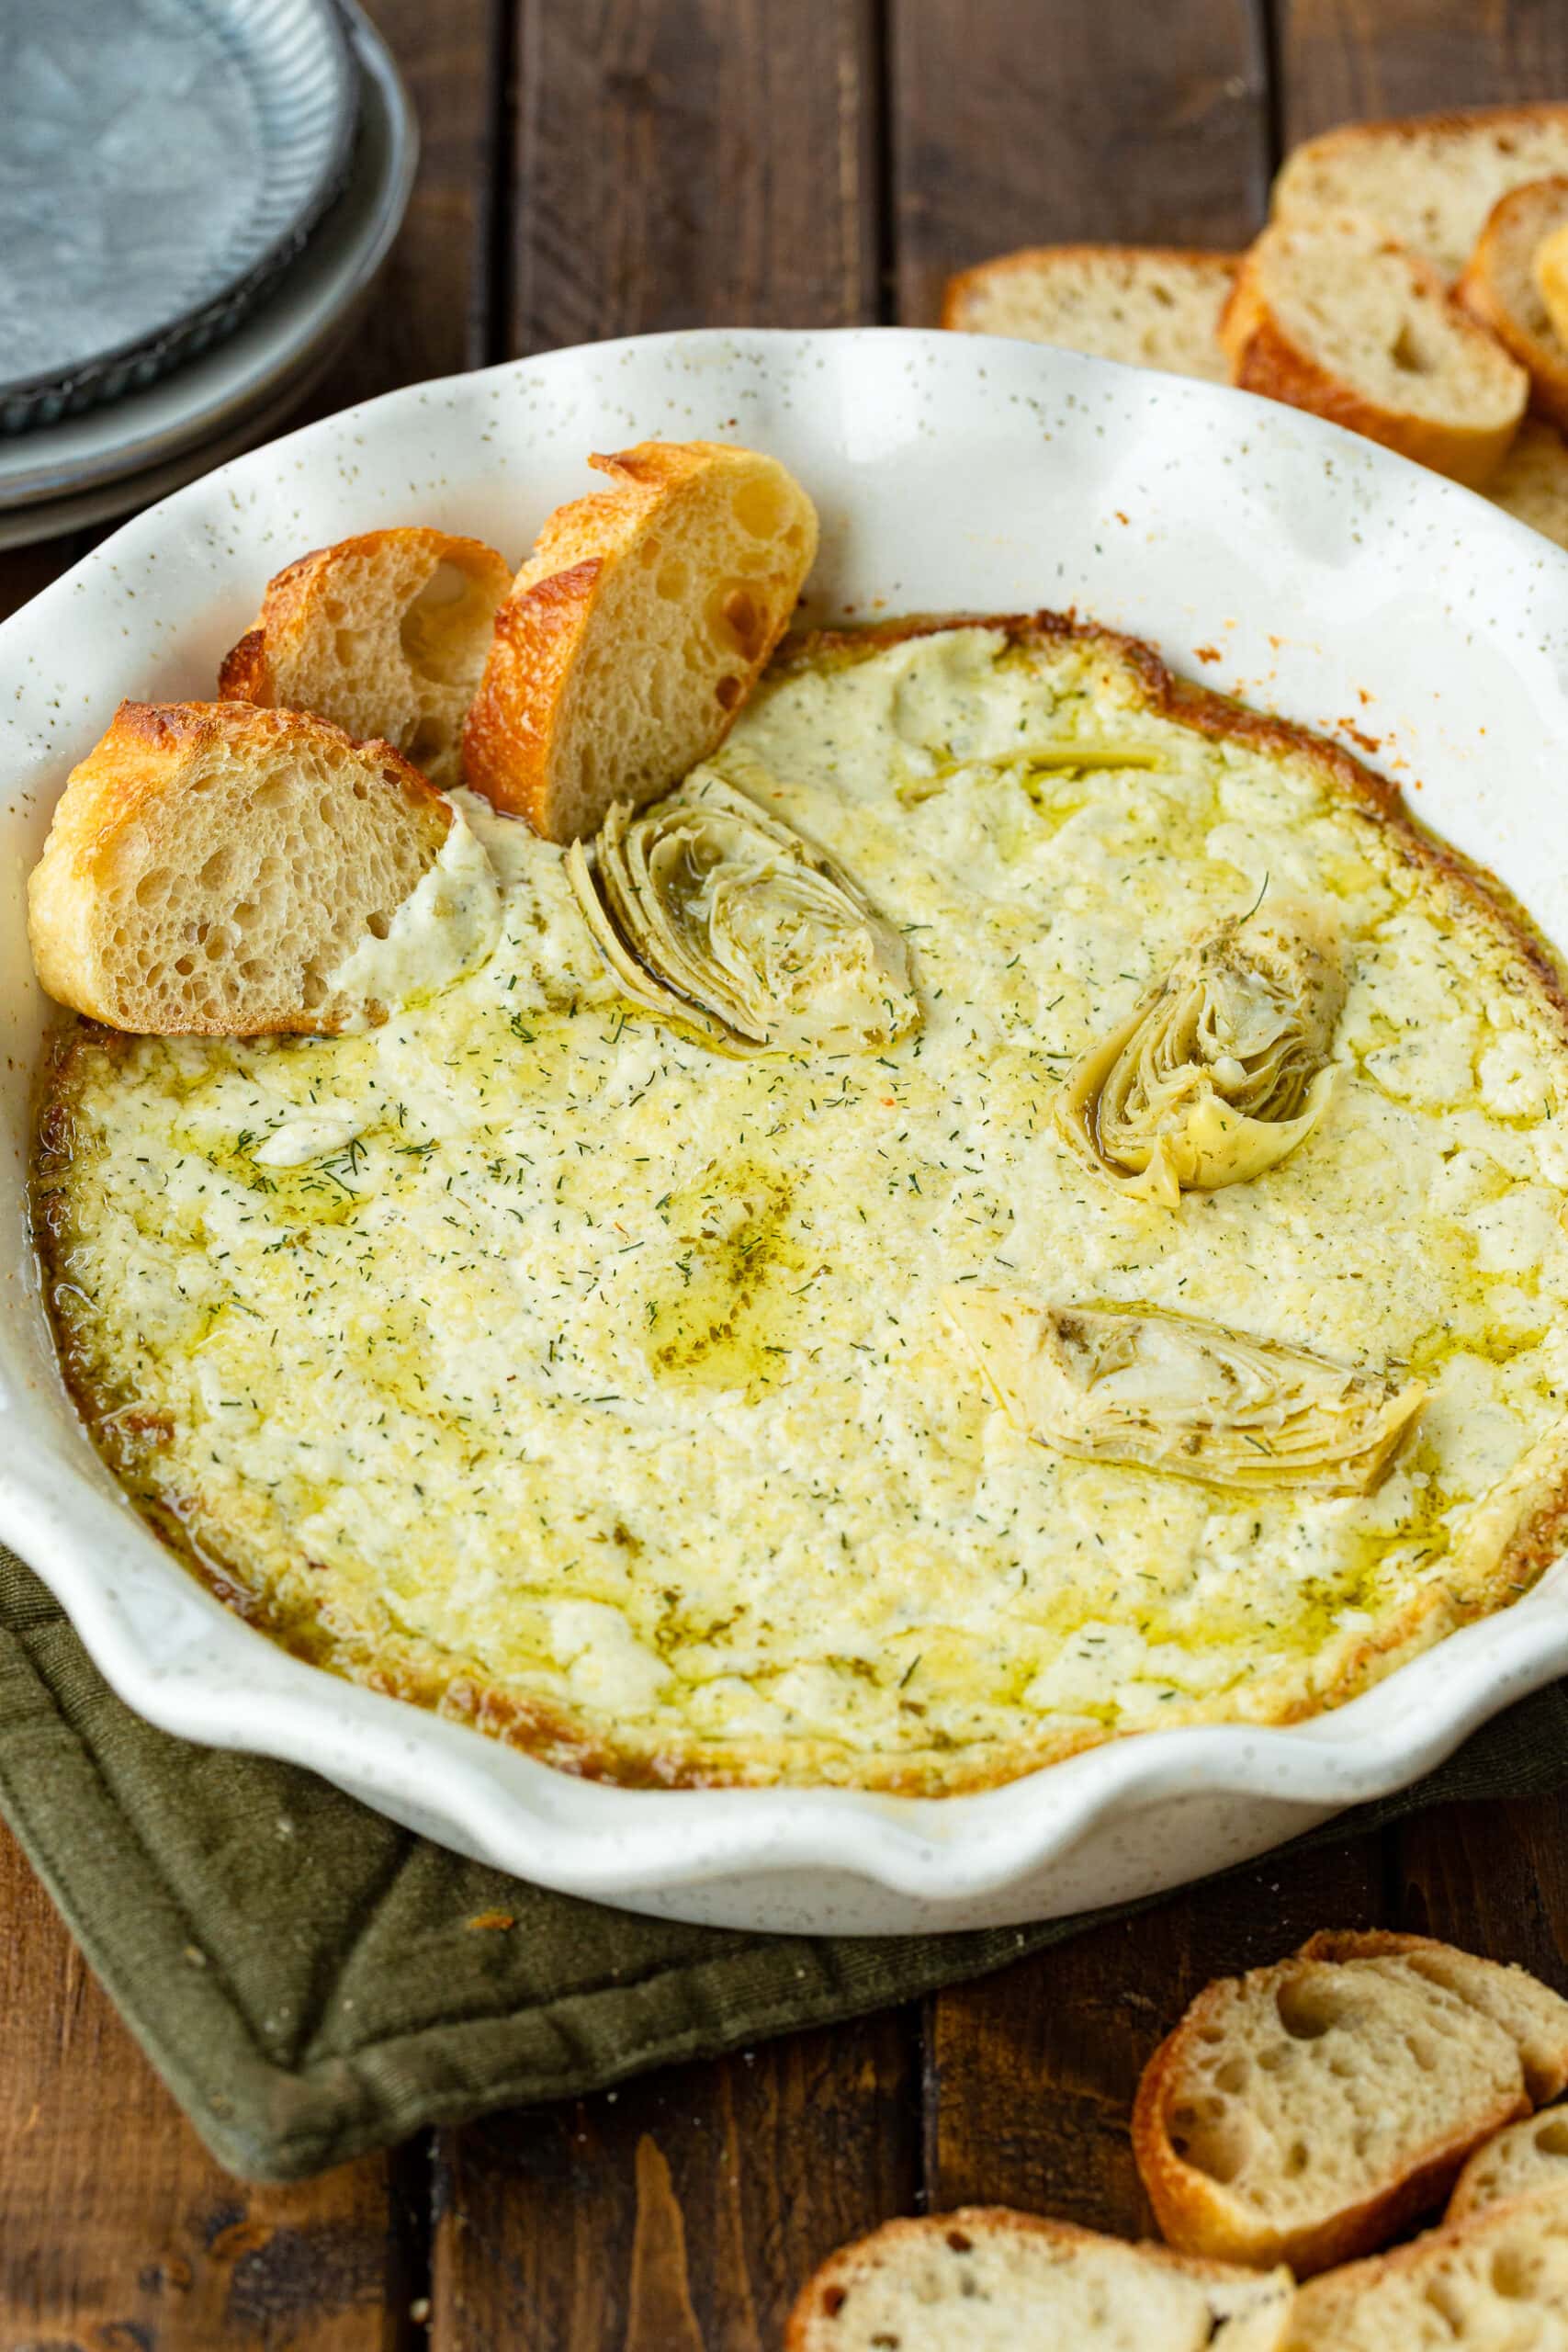 a photo of a circular white ceramic baking dish full of golden creamy artichoke dip with three slices of baguette stuck in the dip along the side of the pan.